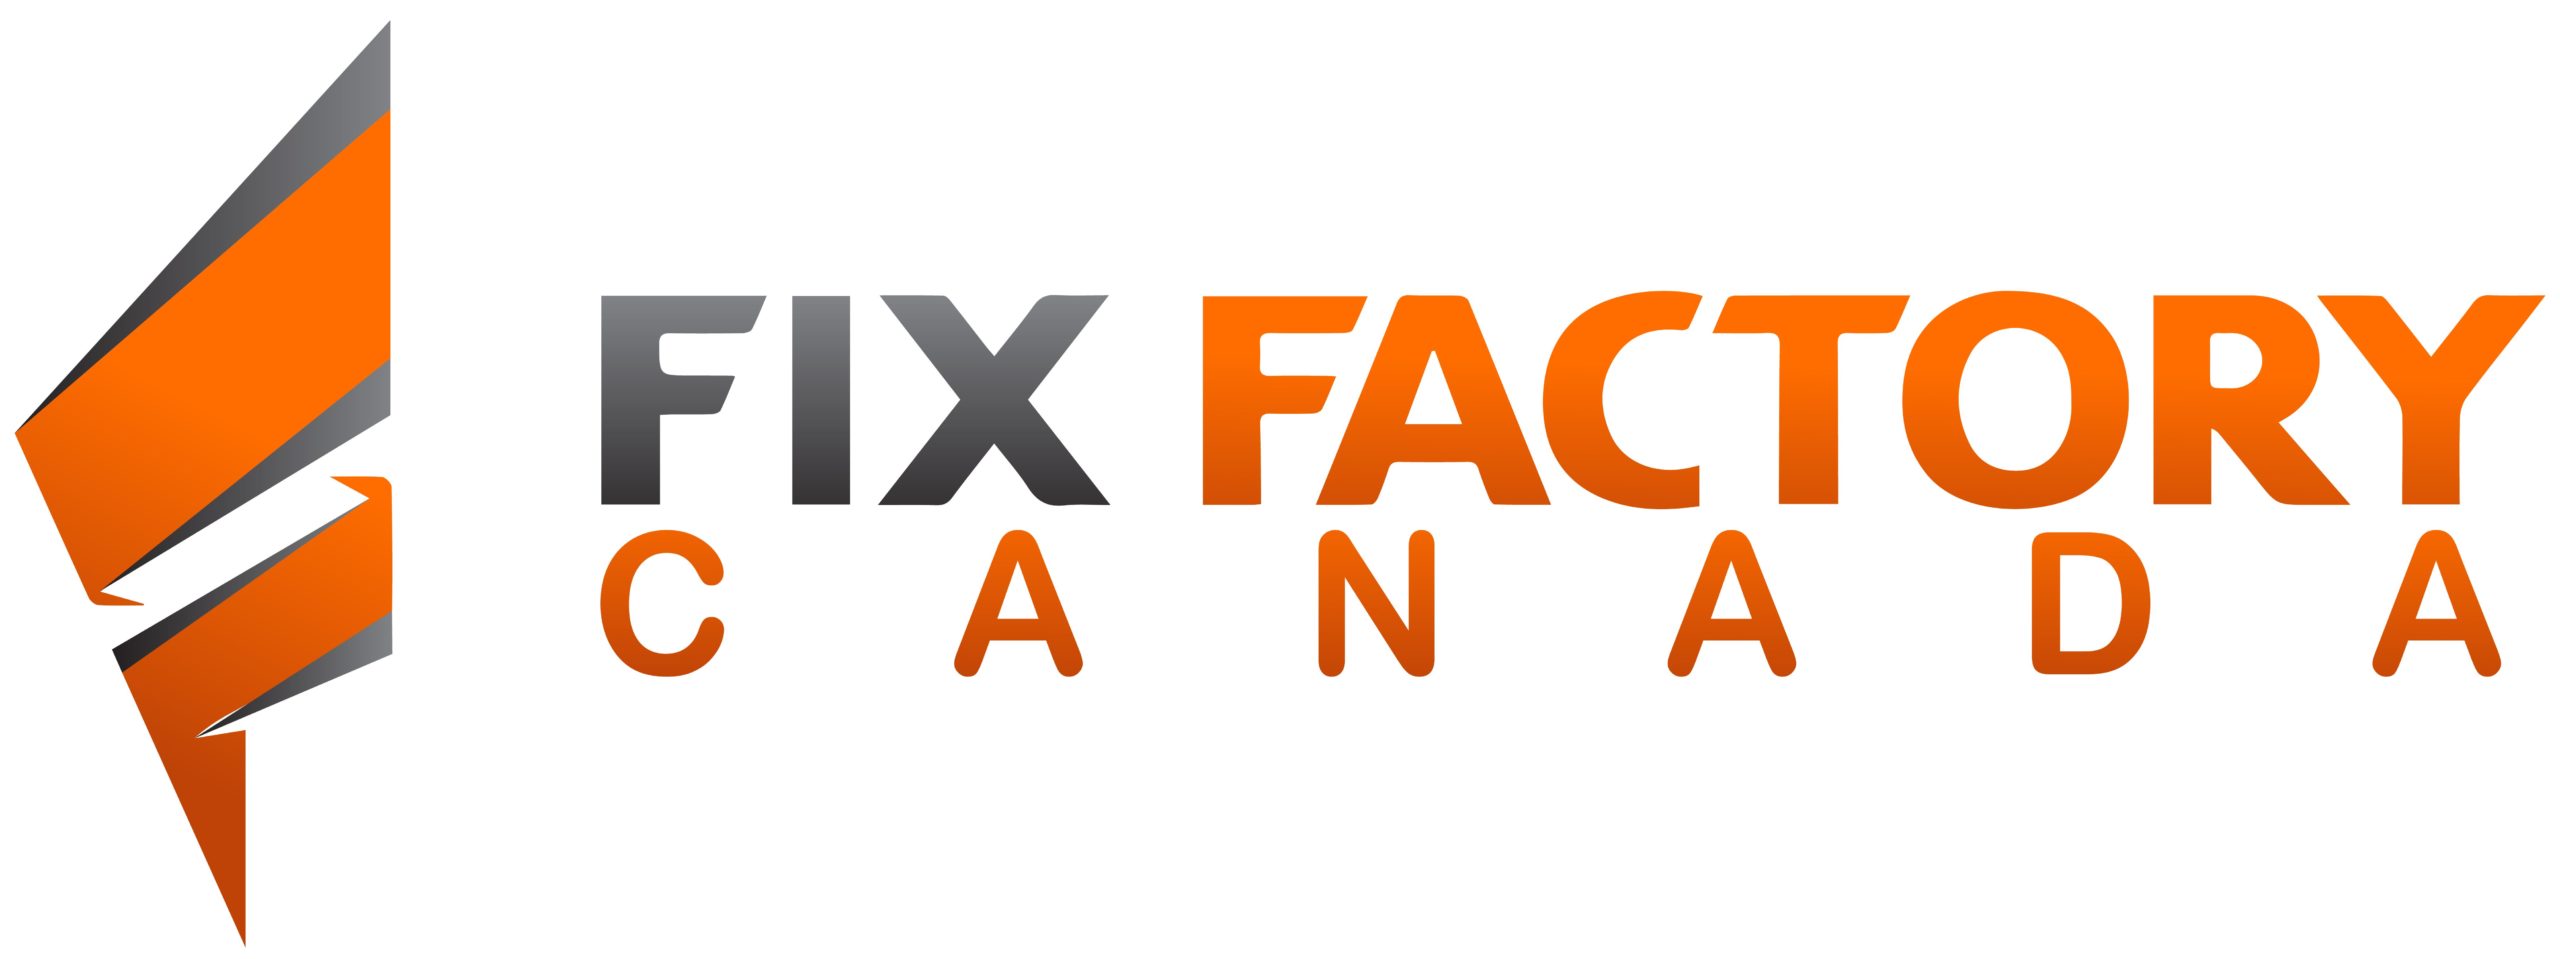 Fix Factory Canada - Get Fixed - Invoices